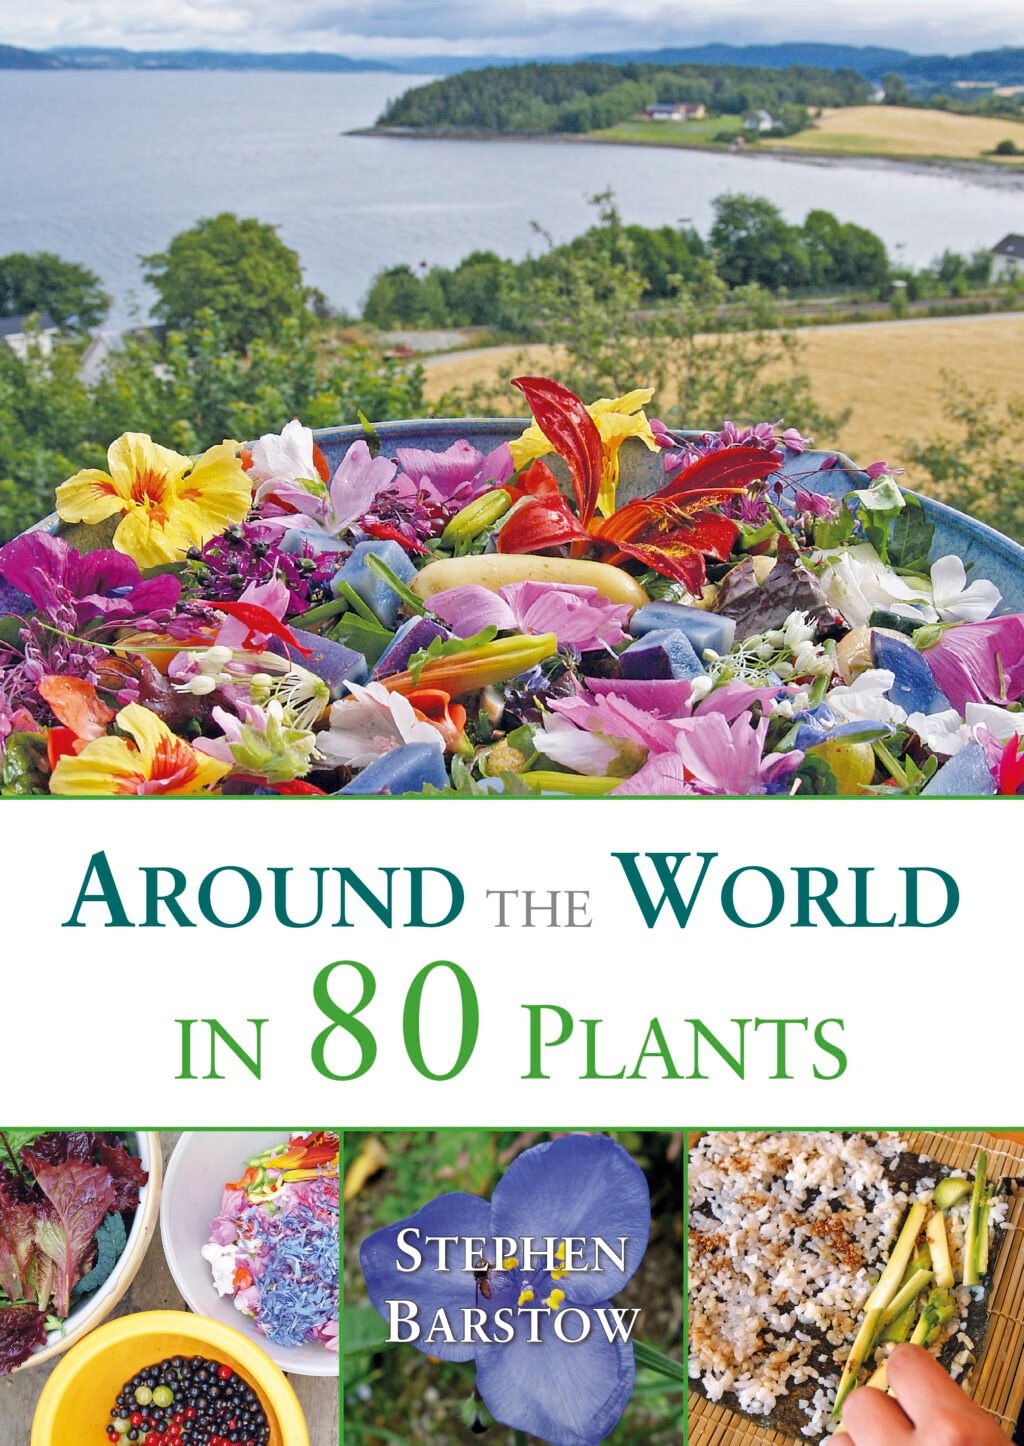 The Around The World in 80 Plants cover